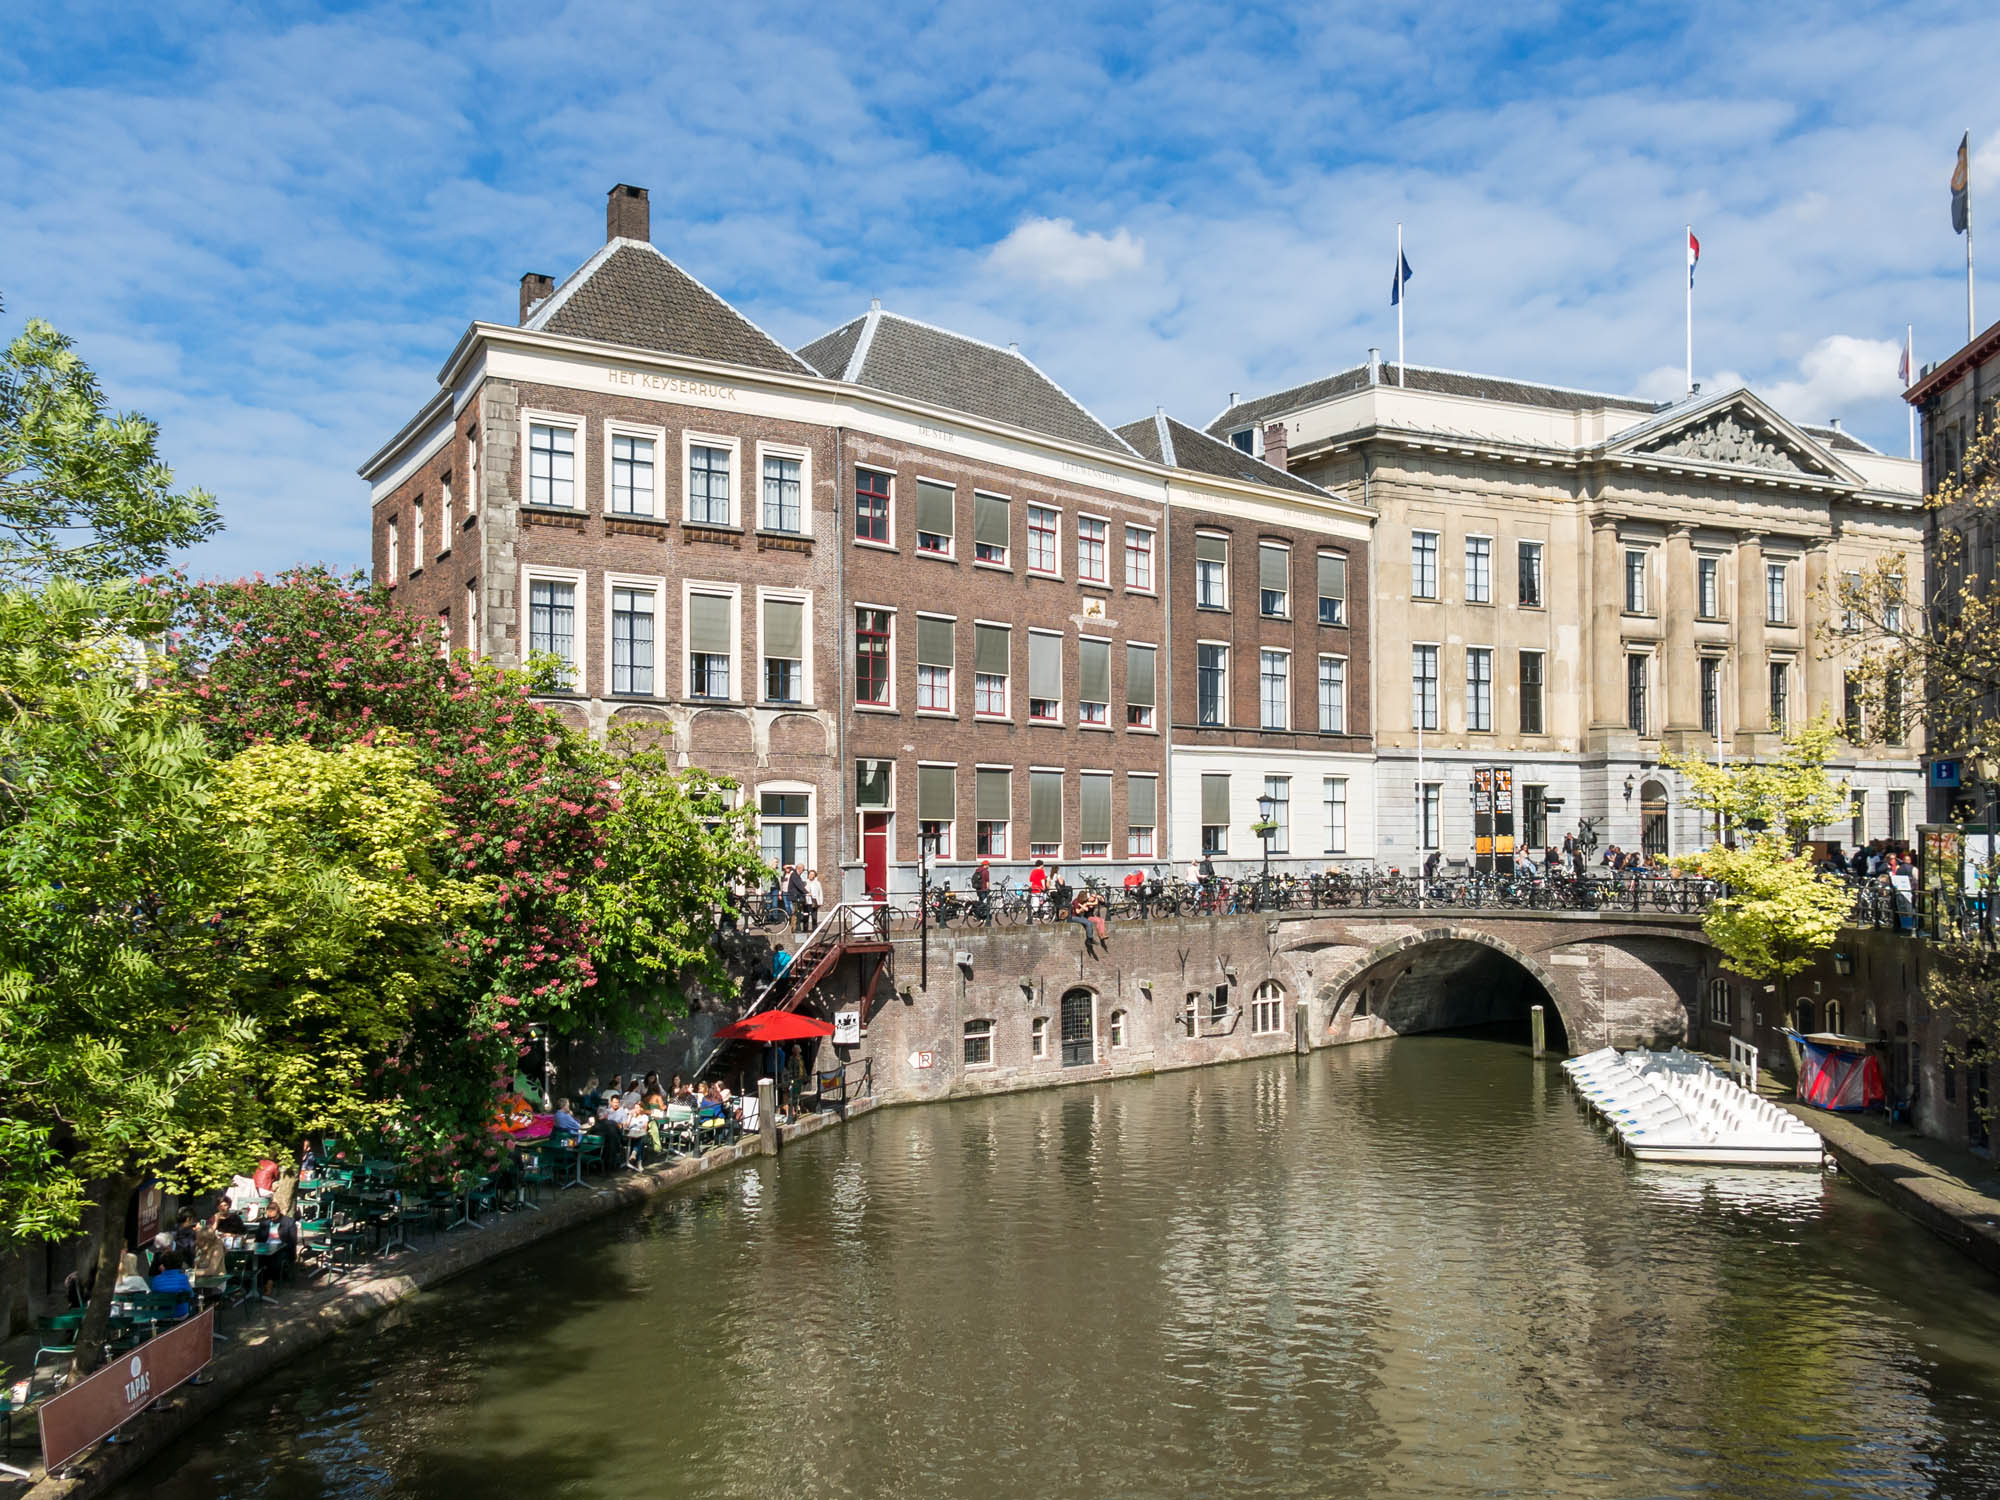 Town Hall Bridge on Oudegracht canal in the city of Utrecht